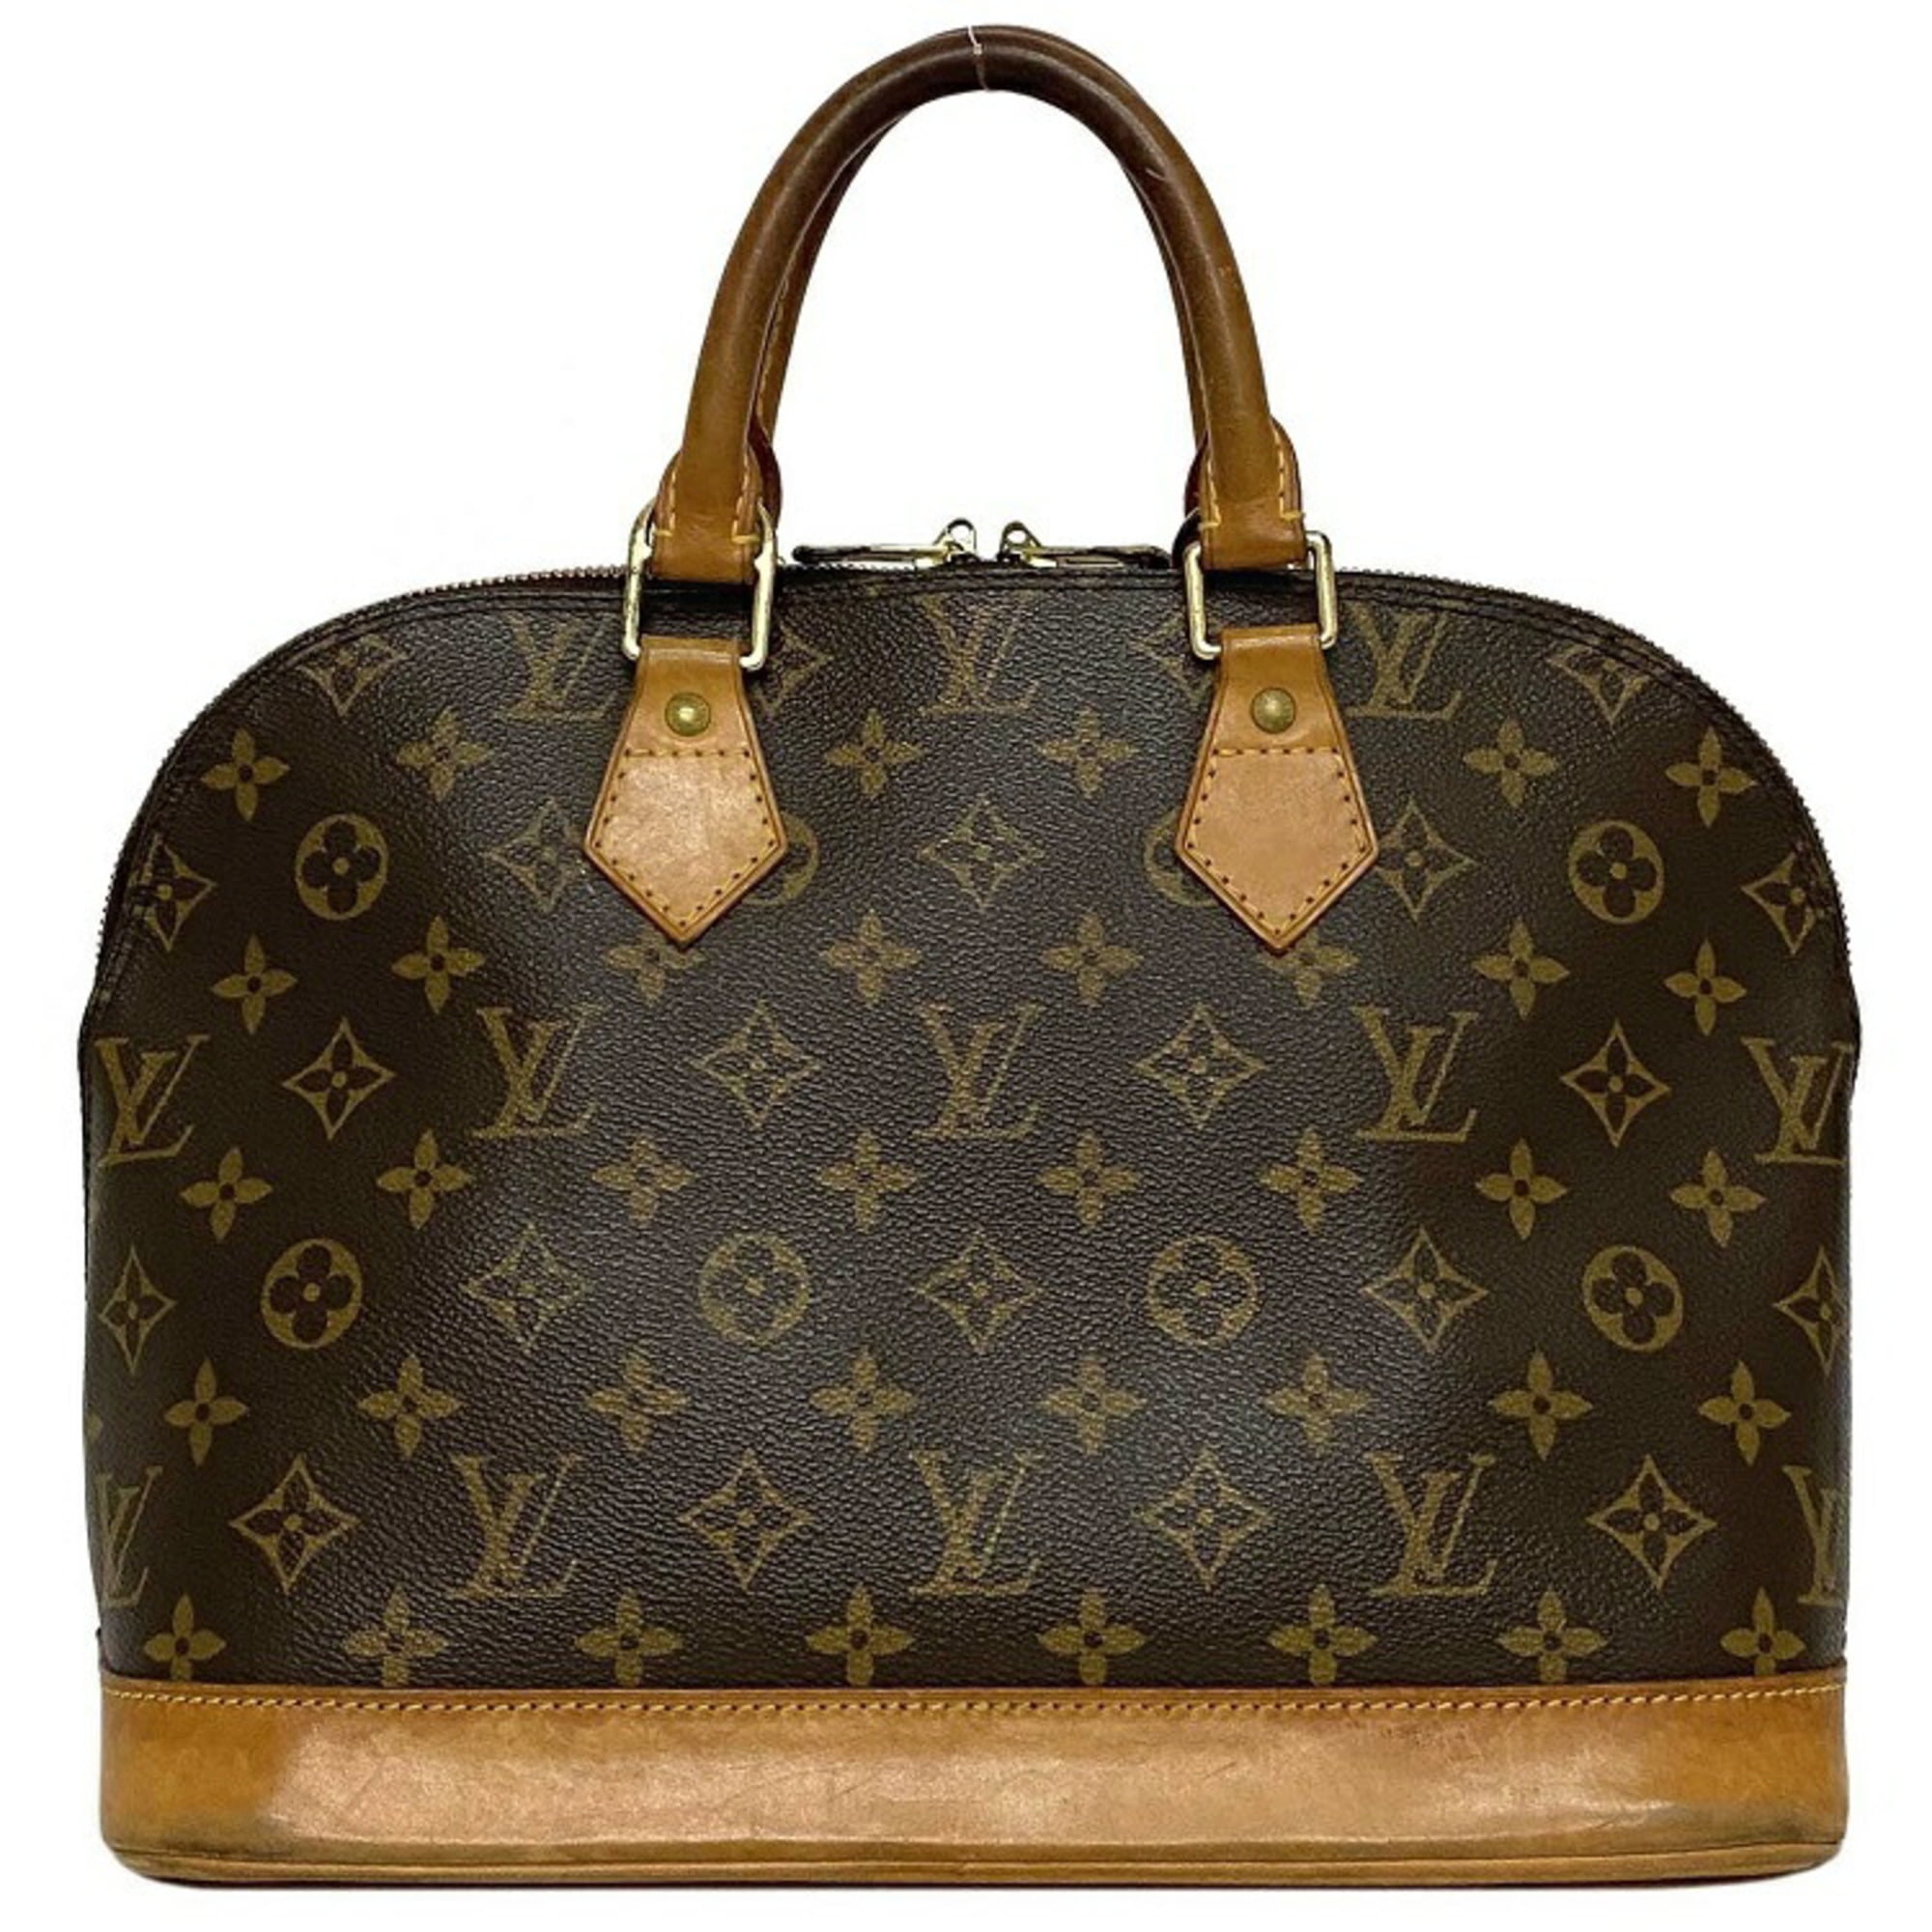 Louis Vuitton - Authenticated Alma Bb Handbag - Leather Brown for Women, Never Worn